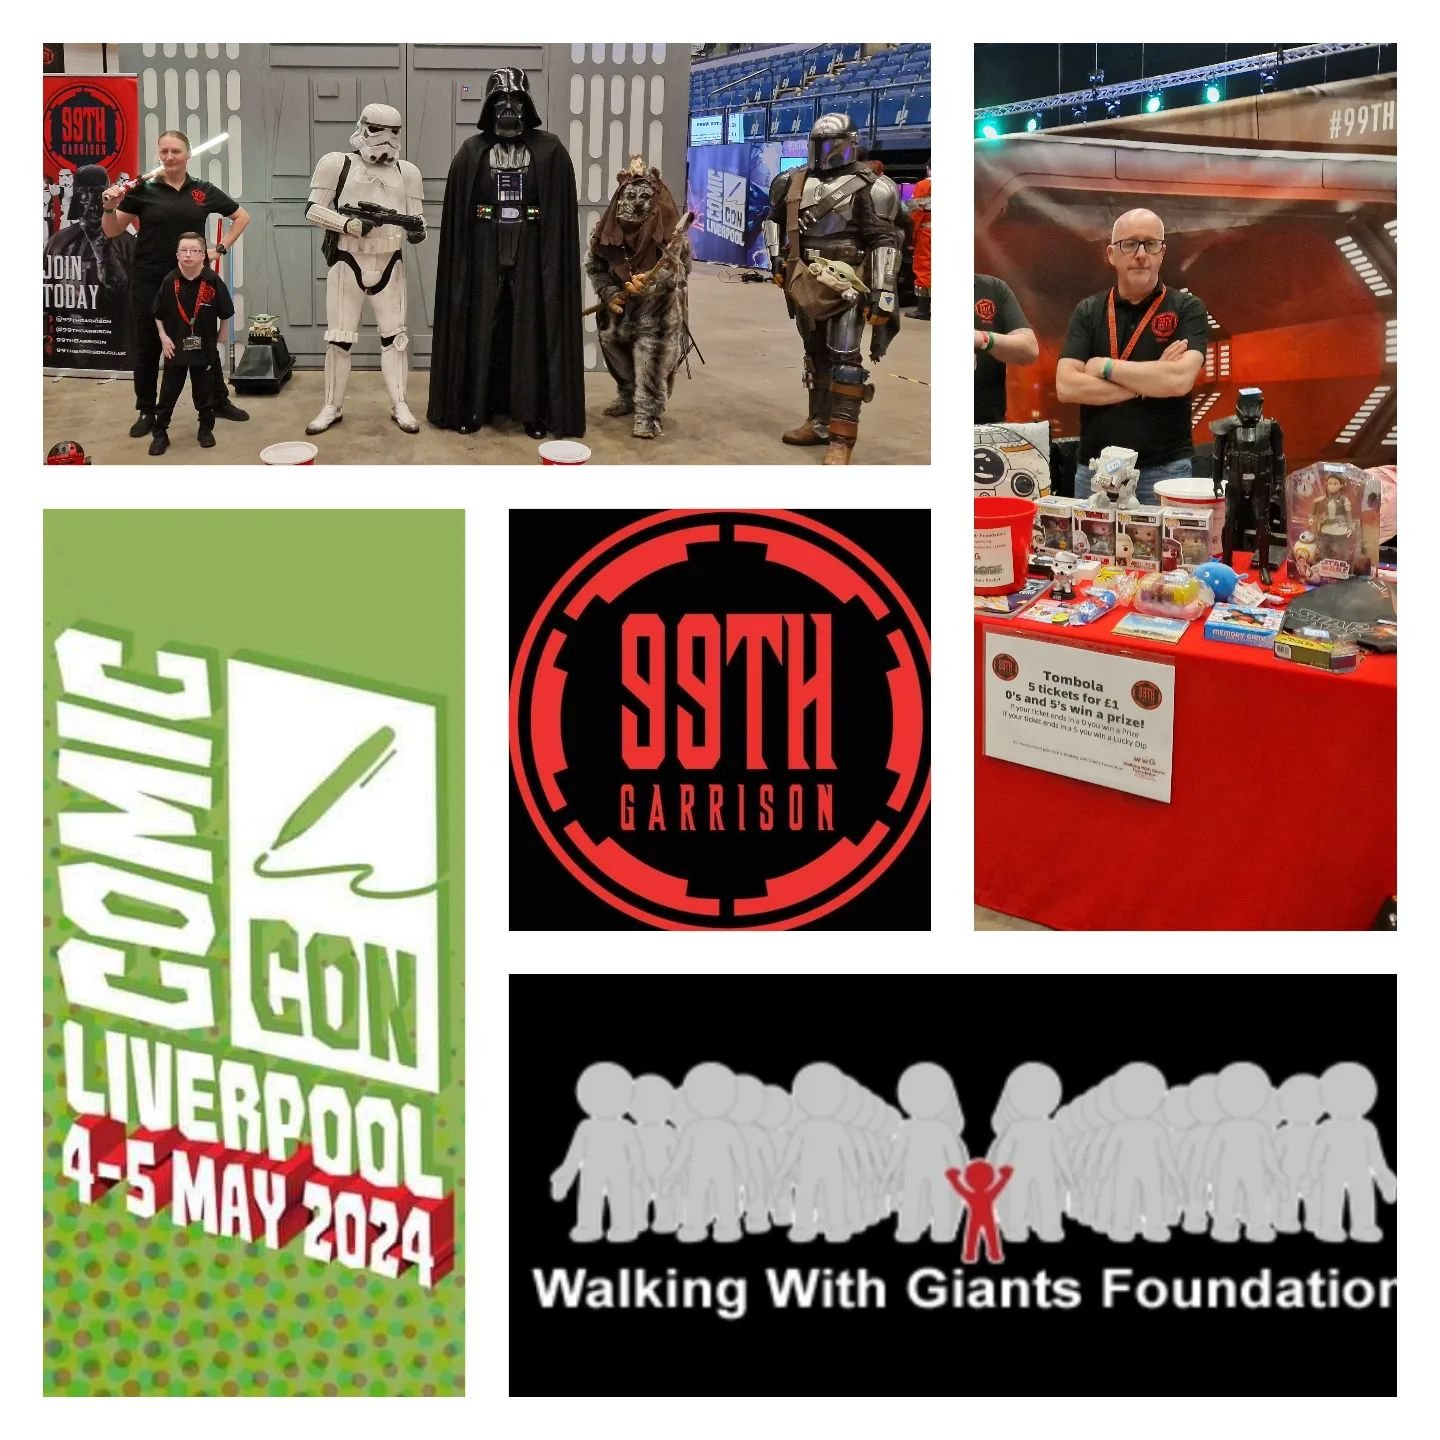 We are out on patrol at @comicconlpool all weekend collecting for @walkingwithgiantsfoundation_ . Come borrow a lightsaber for a donation and have a go on our awesome tombola.

We are behind the x wing on the arena floor

#starwars #vader #stormtroop